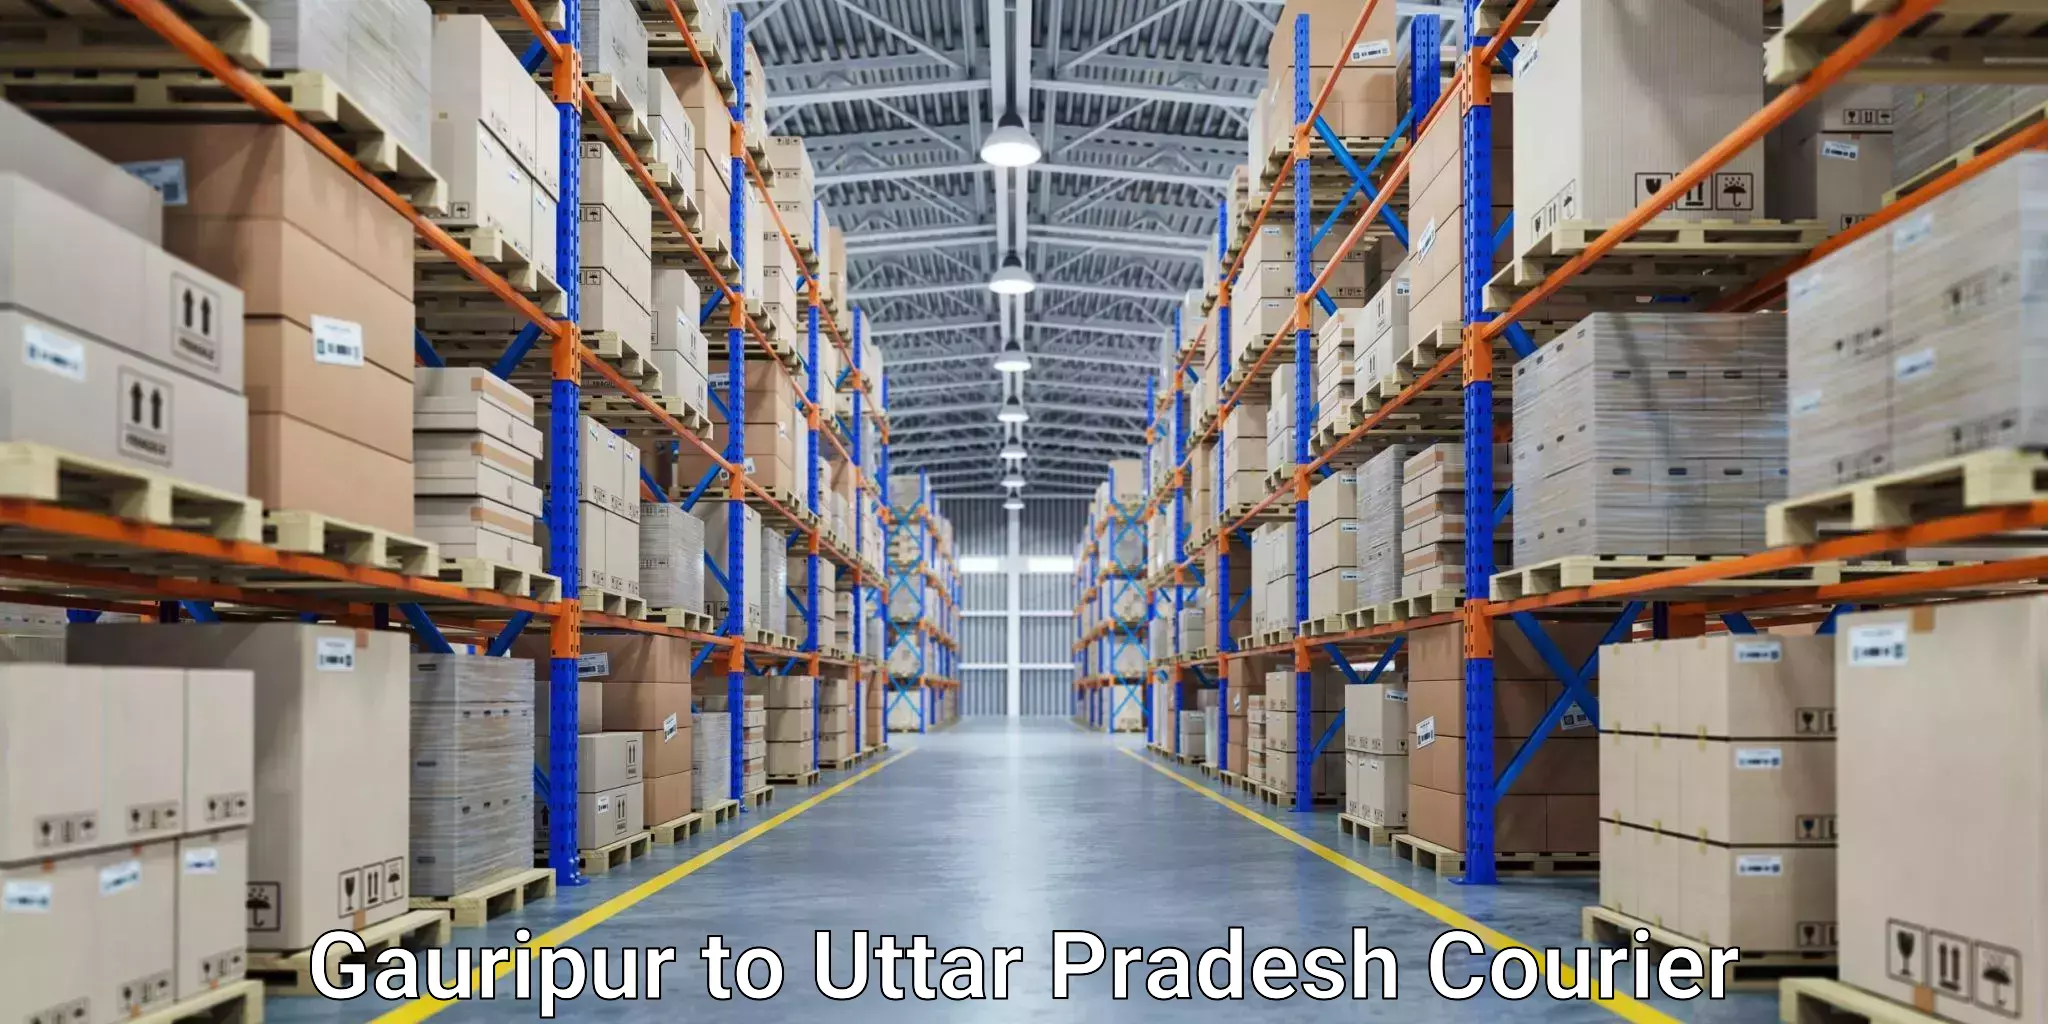 Express delivery capabilities Gauripur to Baksha